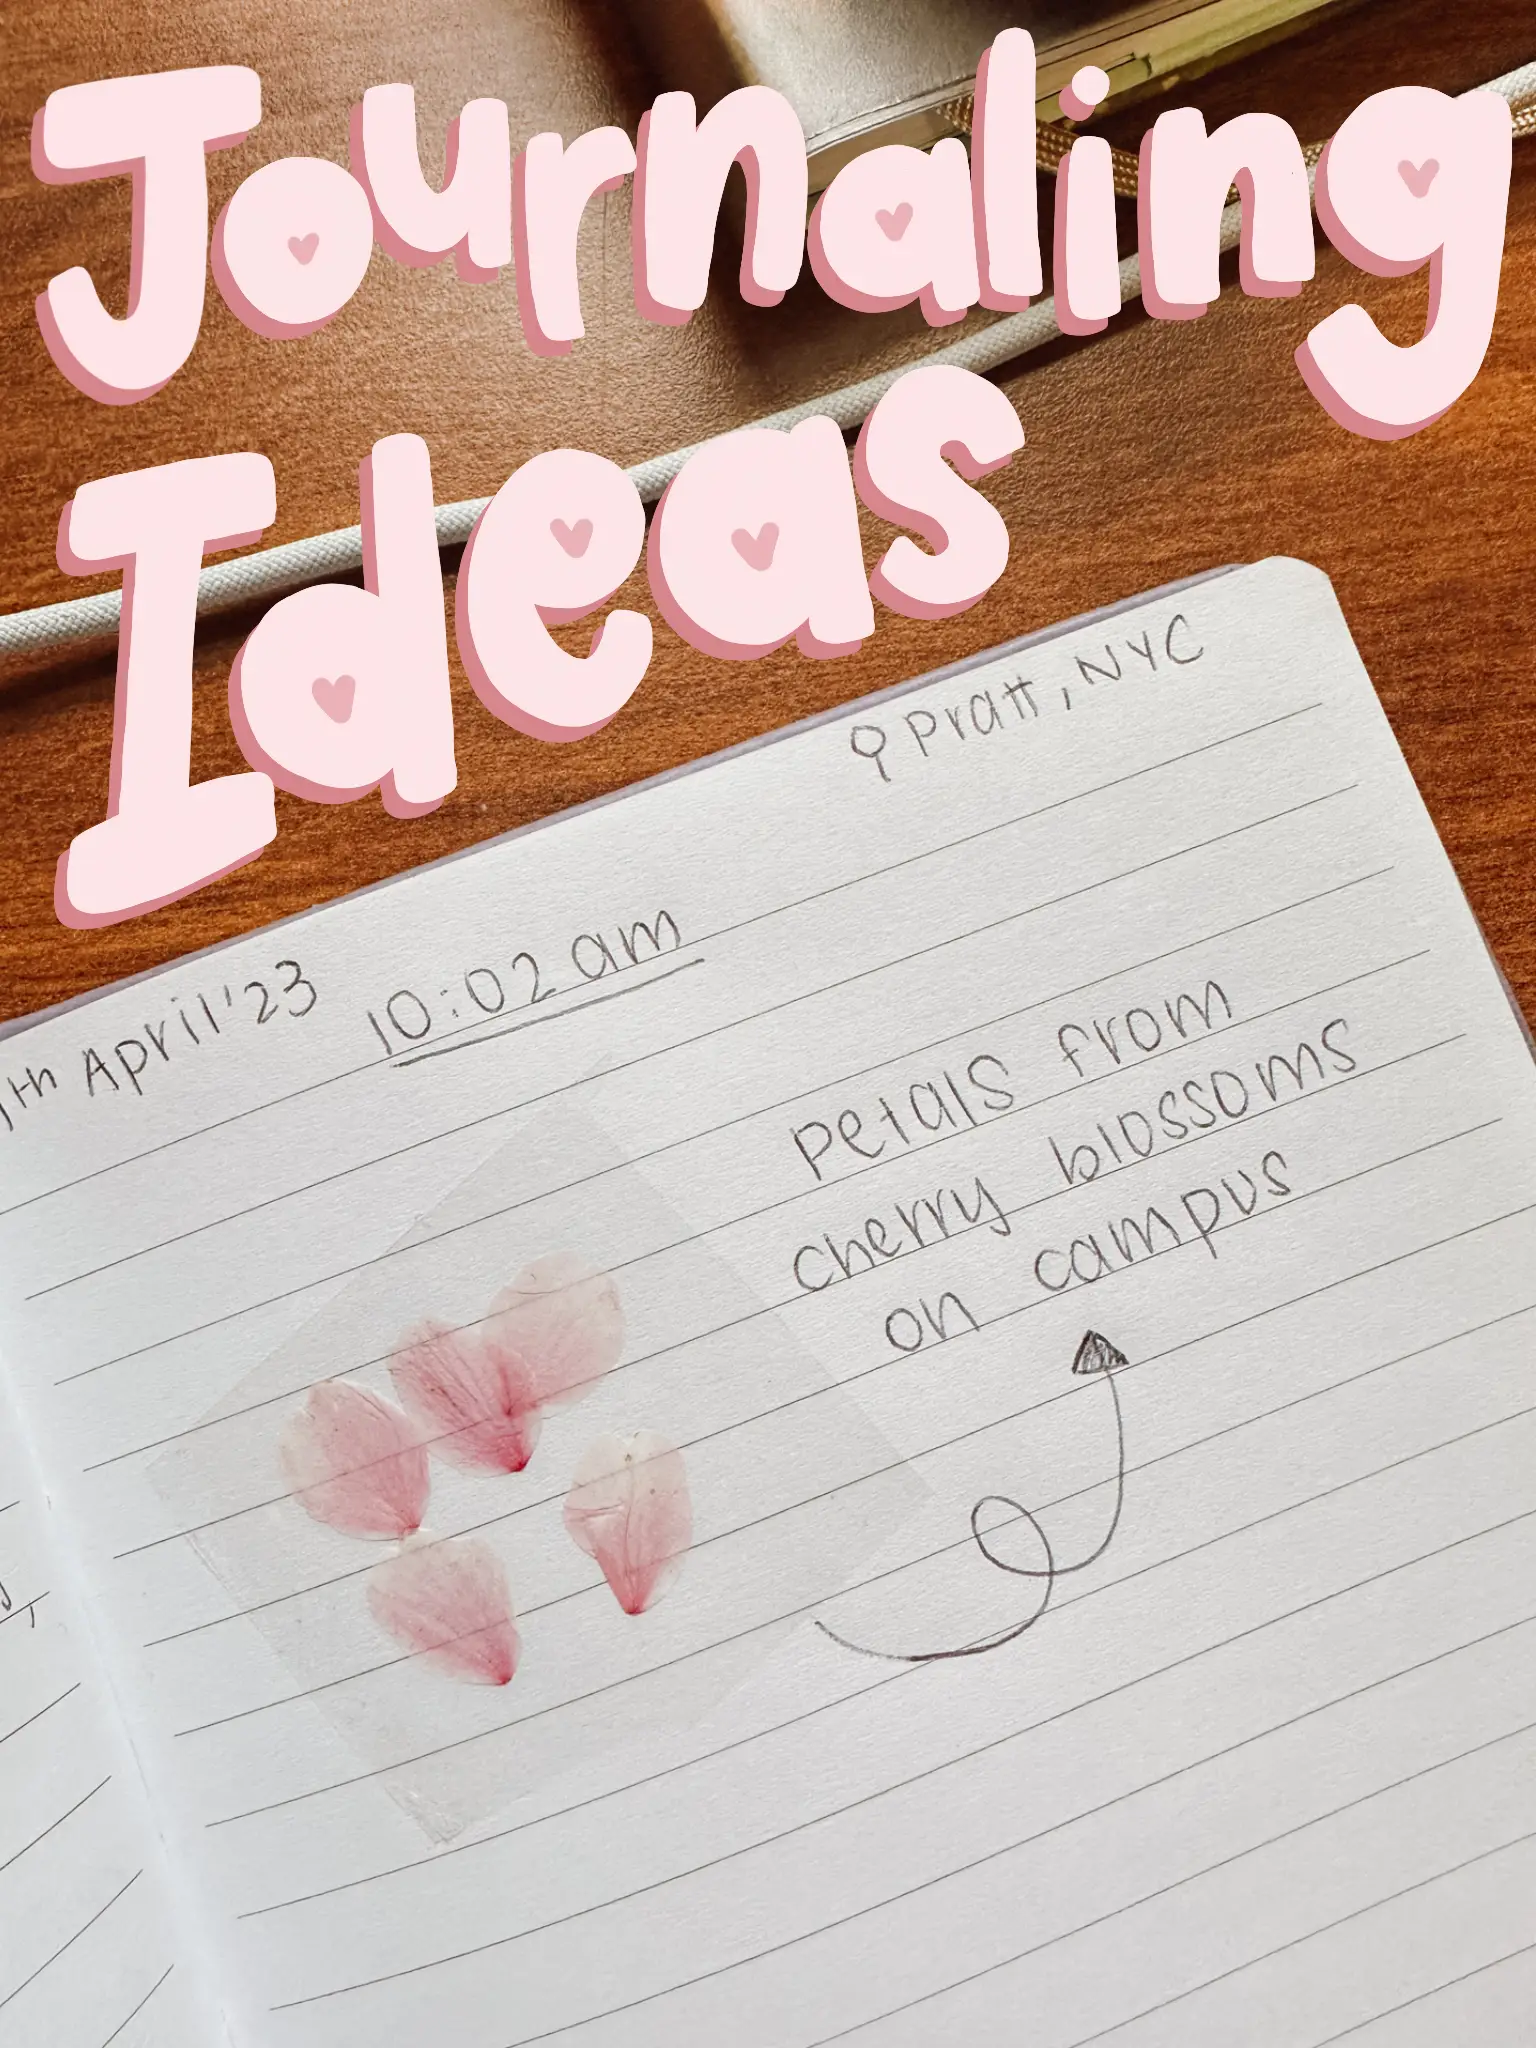 Journaling Tips/Ideas 💓📓, Gallery posted by Sanisha Agarwal